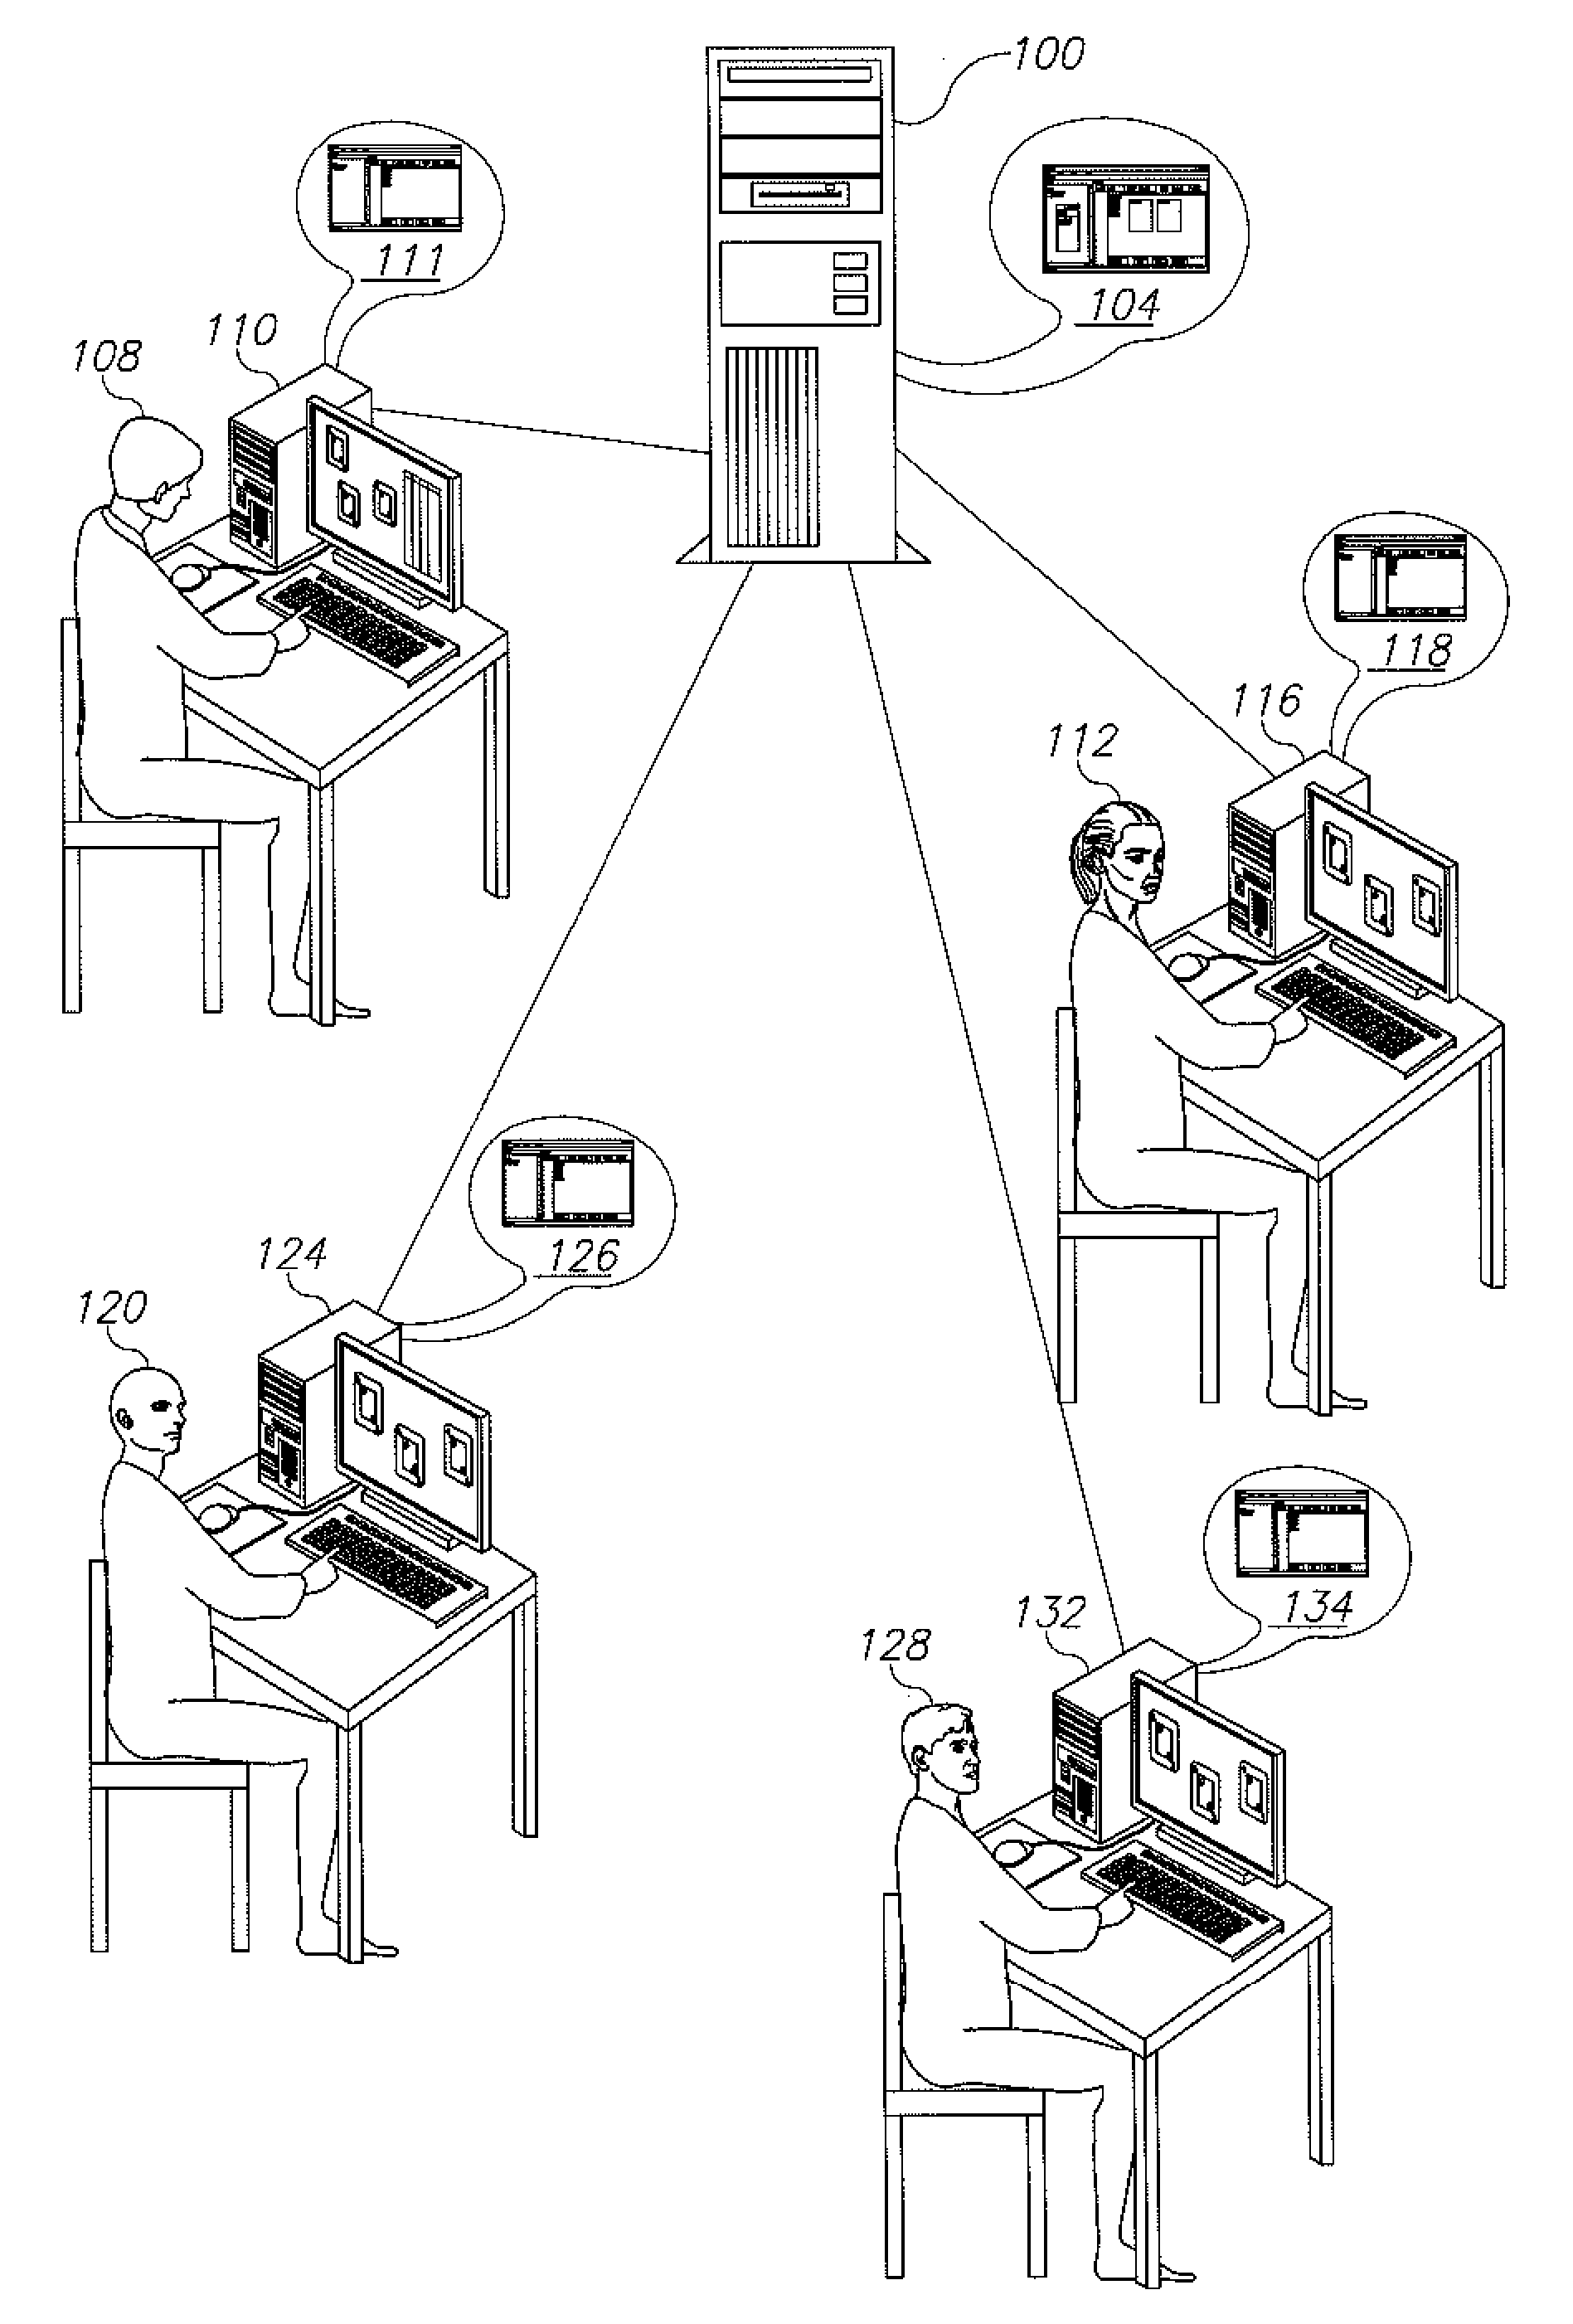 Method and apparatus for preventing collusions in online games